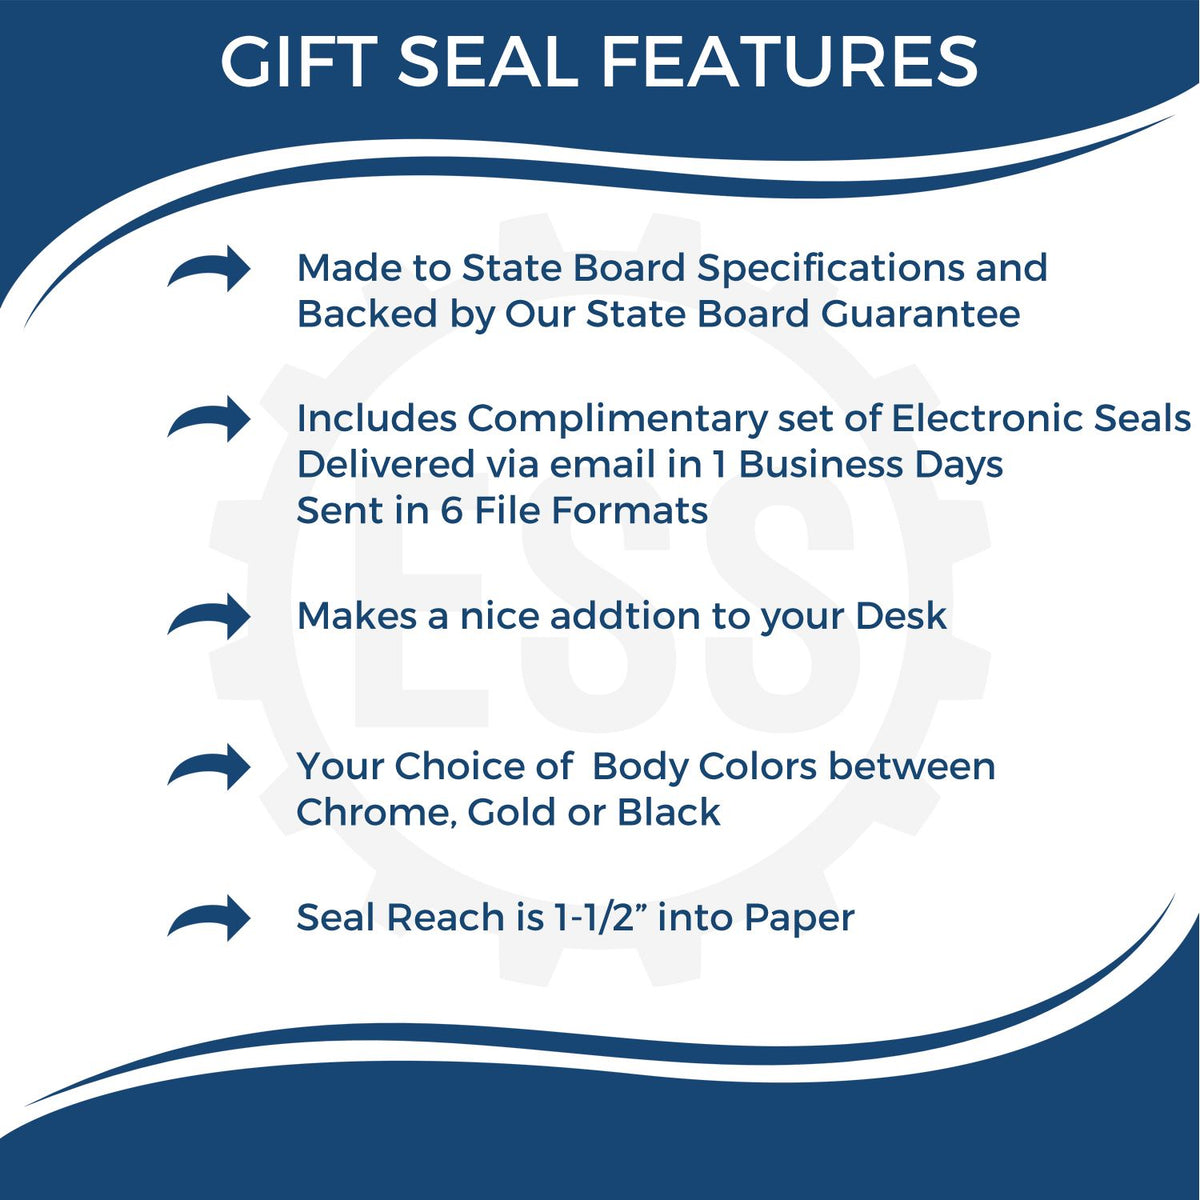 A picture of an infographic highlighting the selling points for the Gift New Hampshire Engineer Seal